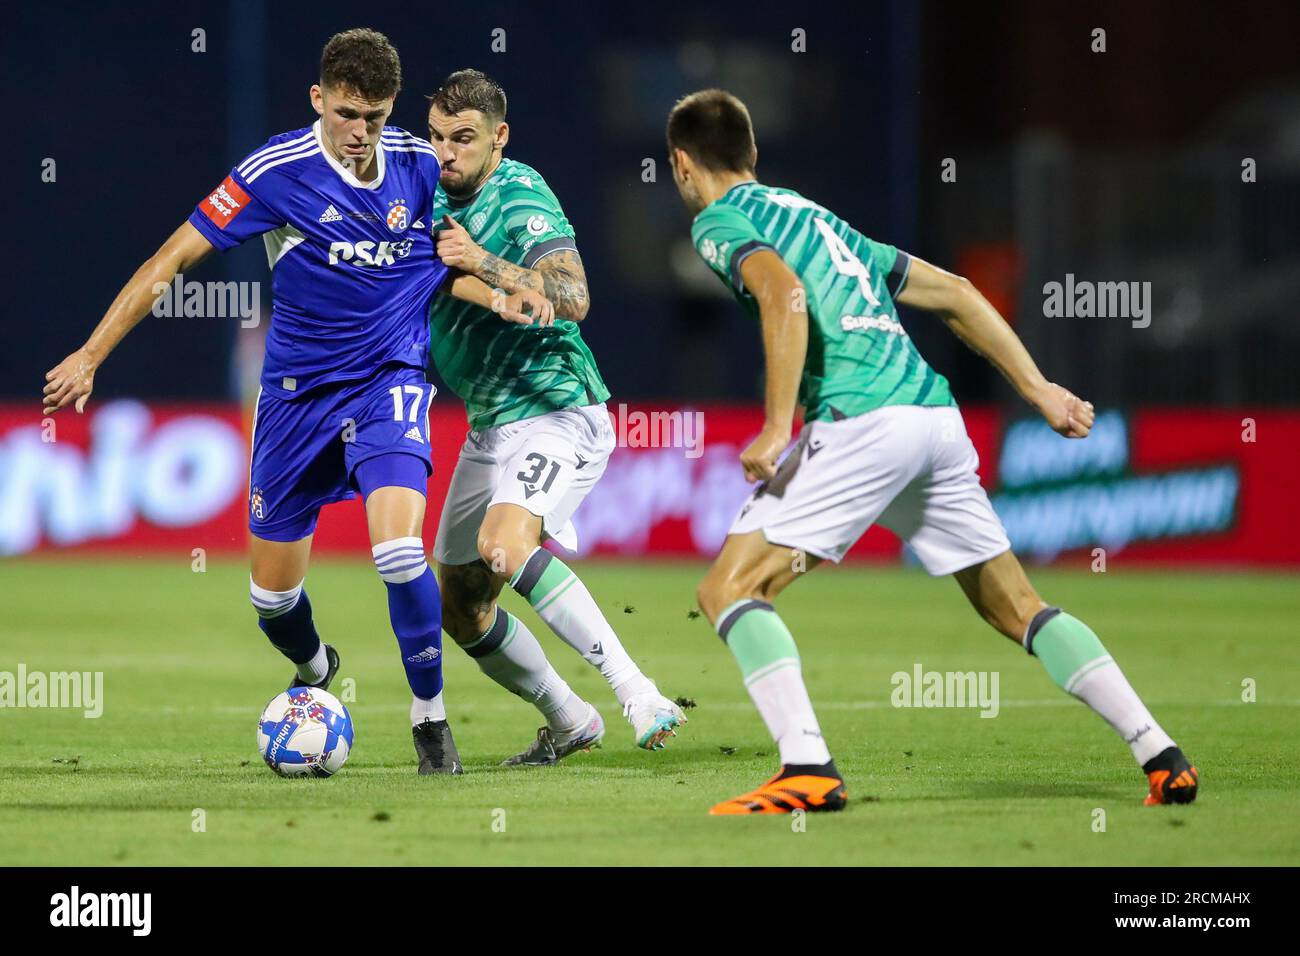 Zagreb, Croatia. 15th July, 2023. Jan Mlakar of Hajduk Split and Fran Topic  of Dinamo Zagreb in action during the Supersport Supercup match between GNK  Dinamo Zagreb and HNK Hajduk Split at